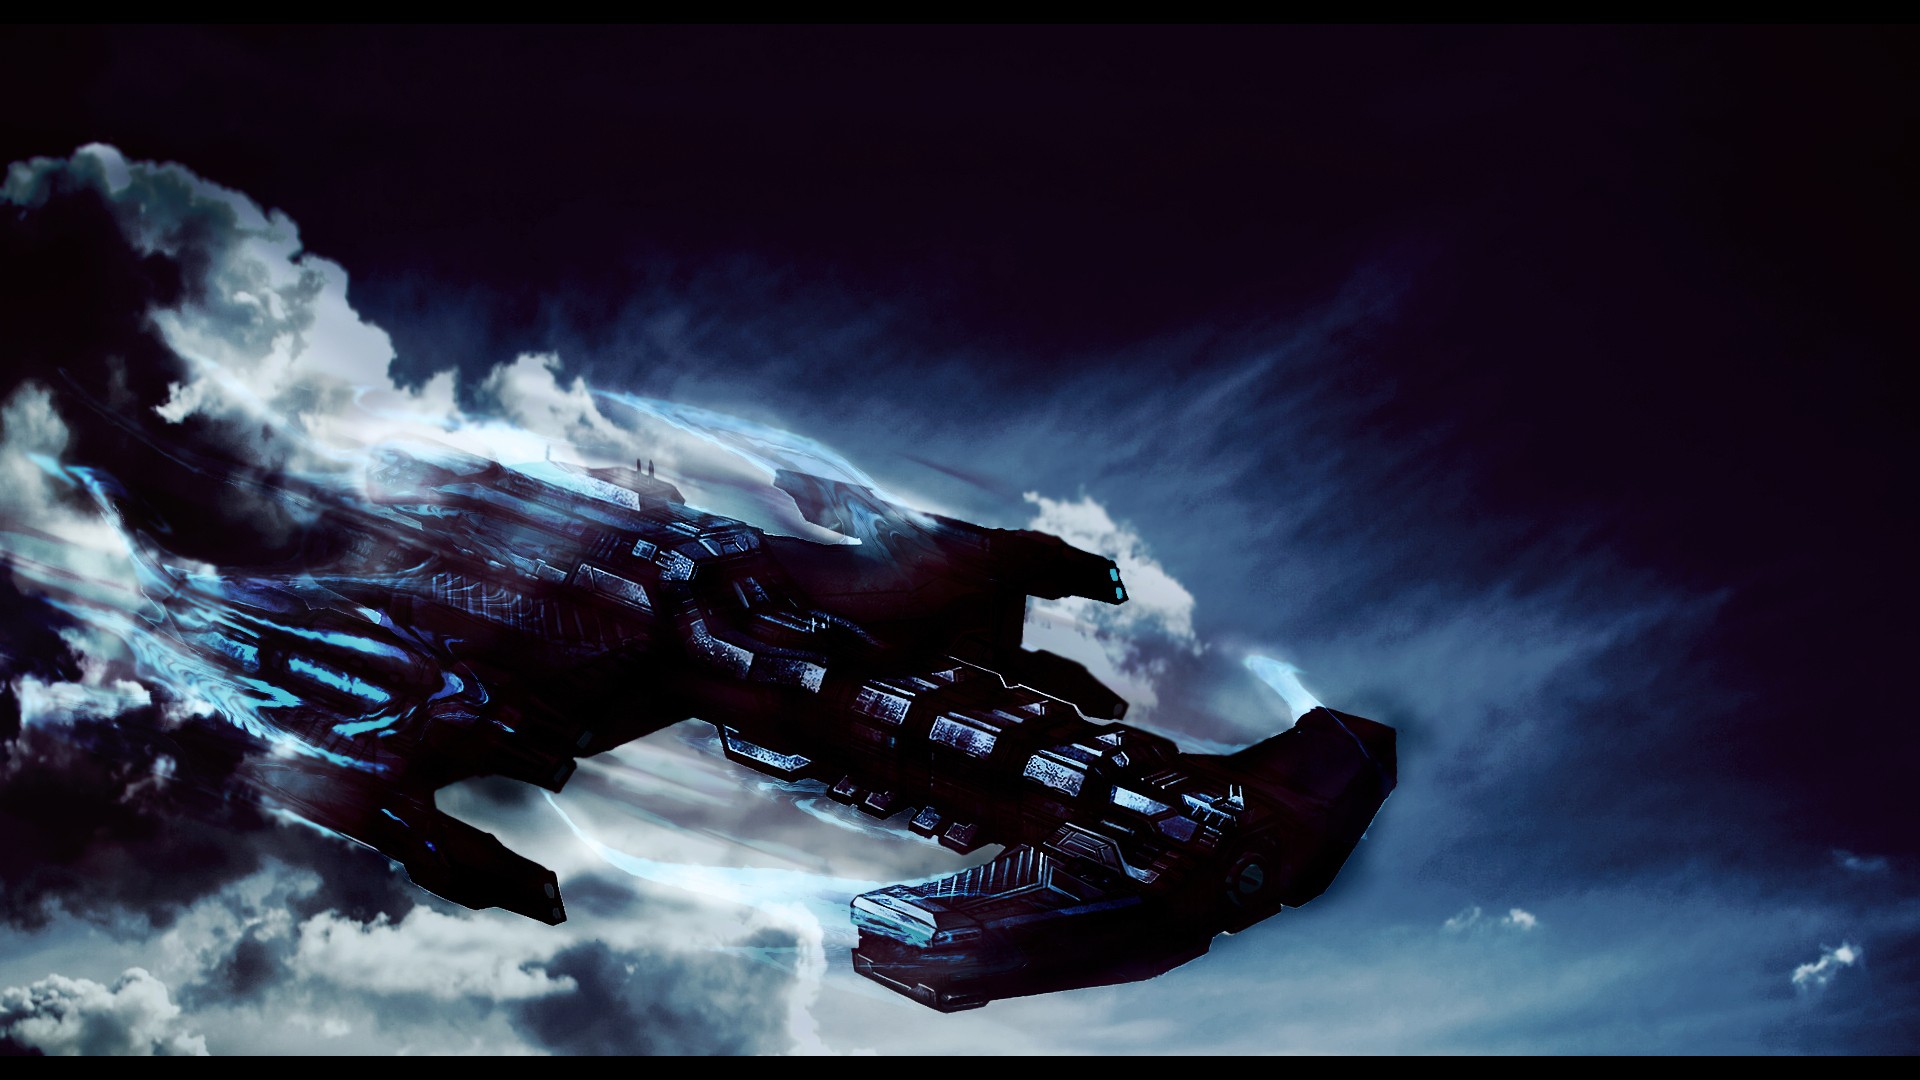 General 1920x1080 StarCraft hyperion video games PC gaming science fiction spaceship vehicle video game art